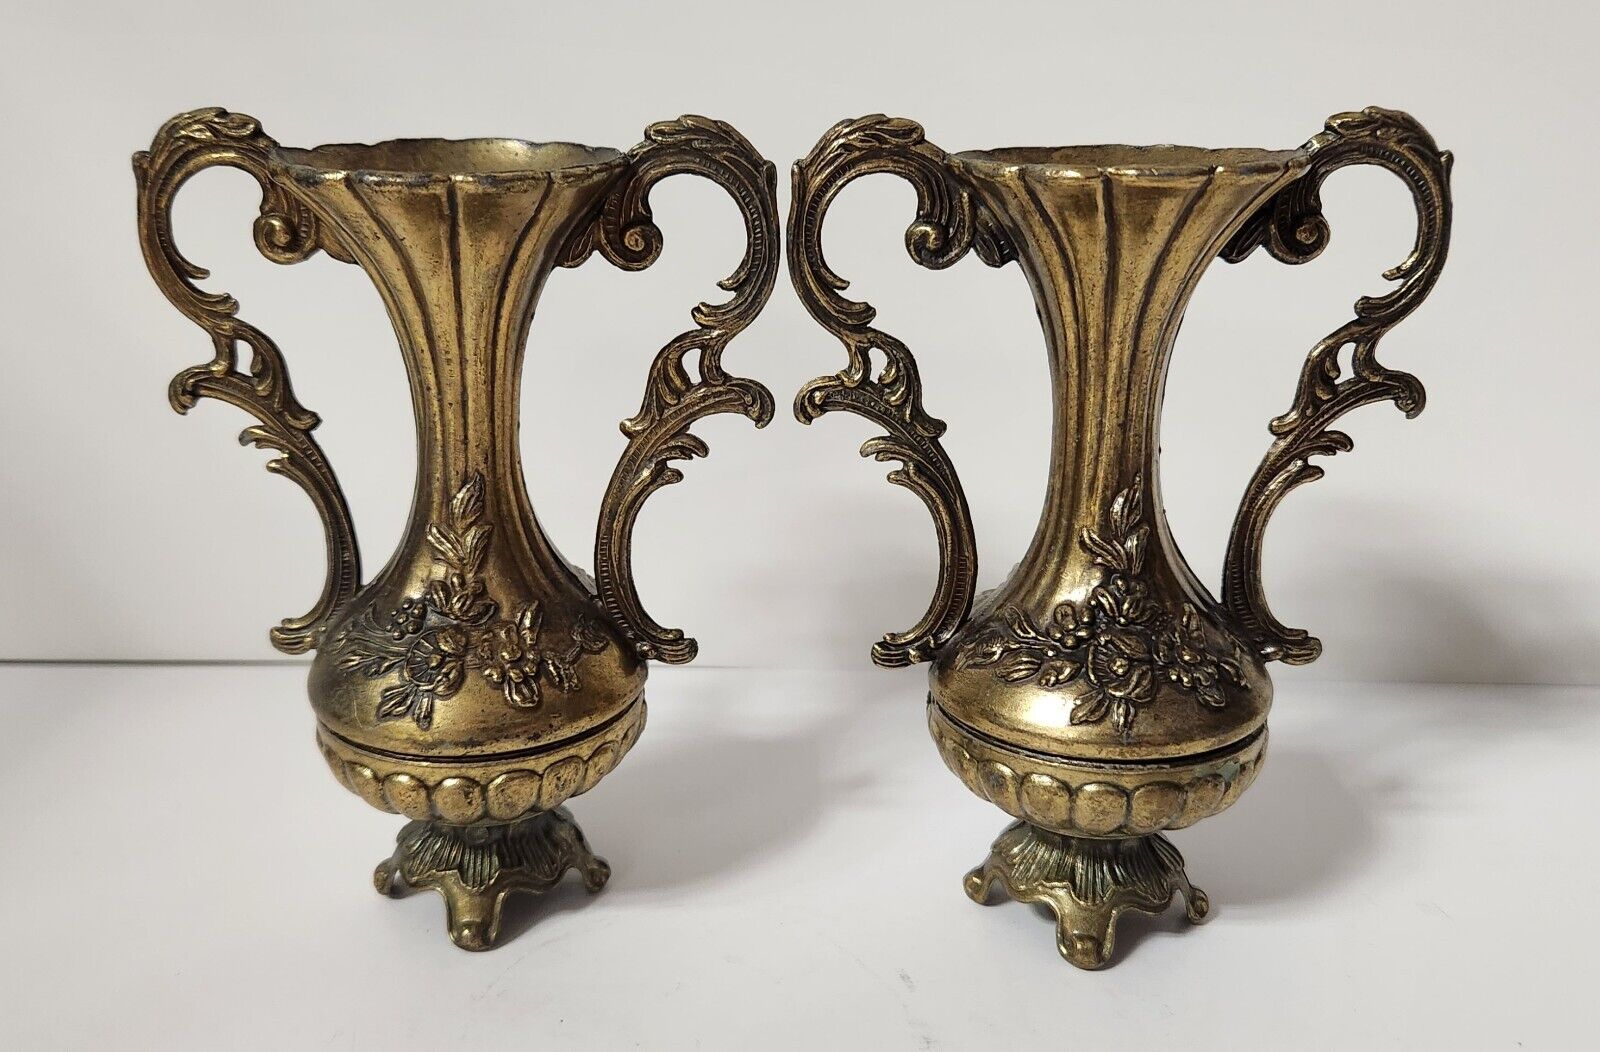 Pair of Ornate Vintage Brass Bud Vases – Made in Italy